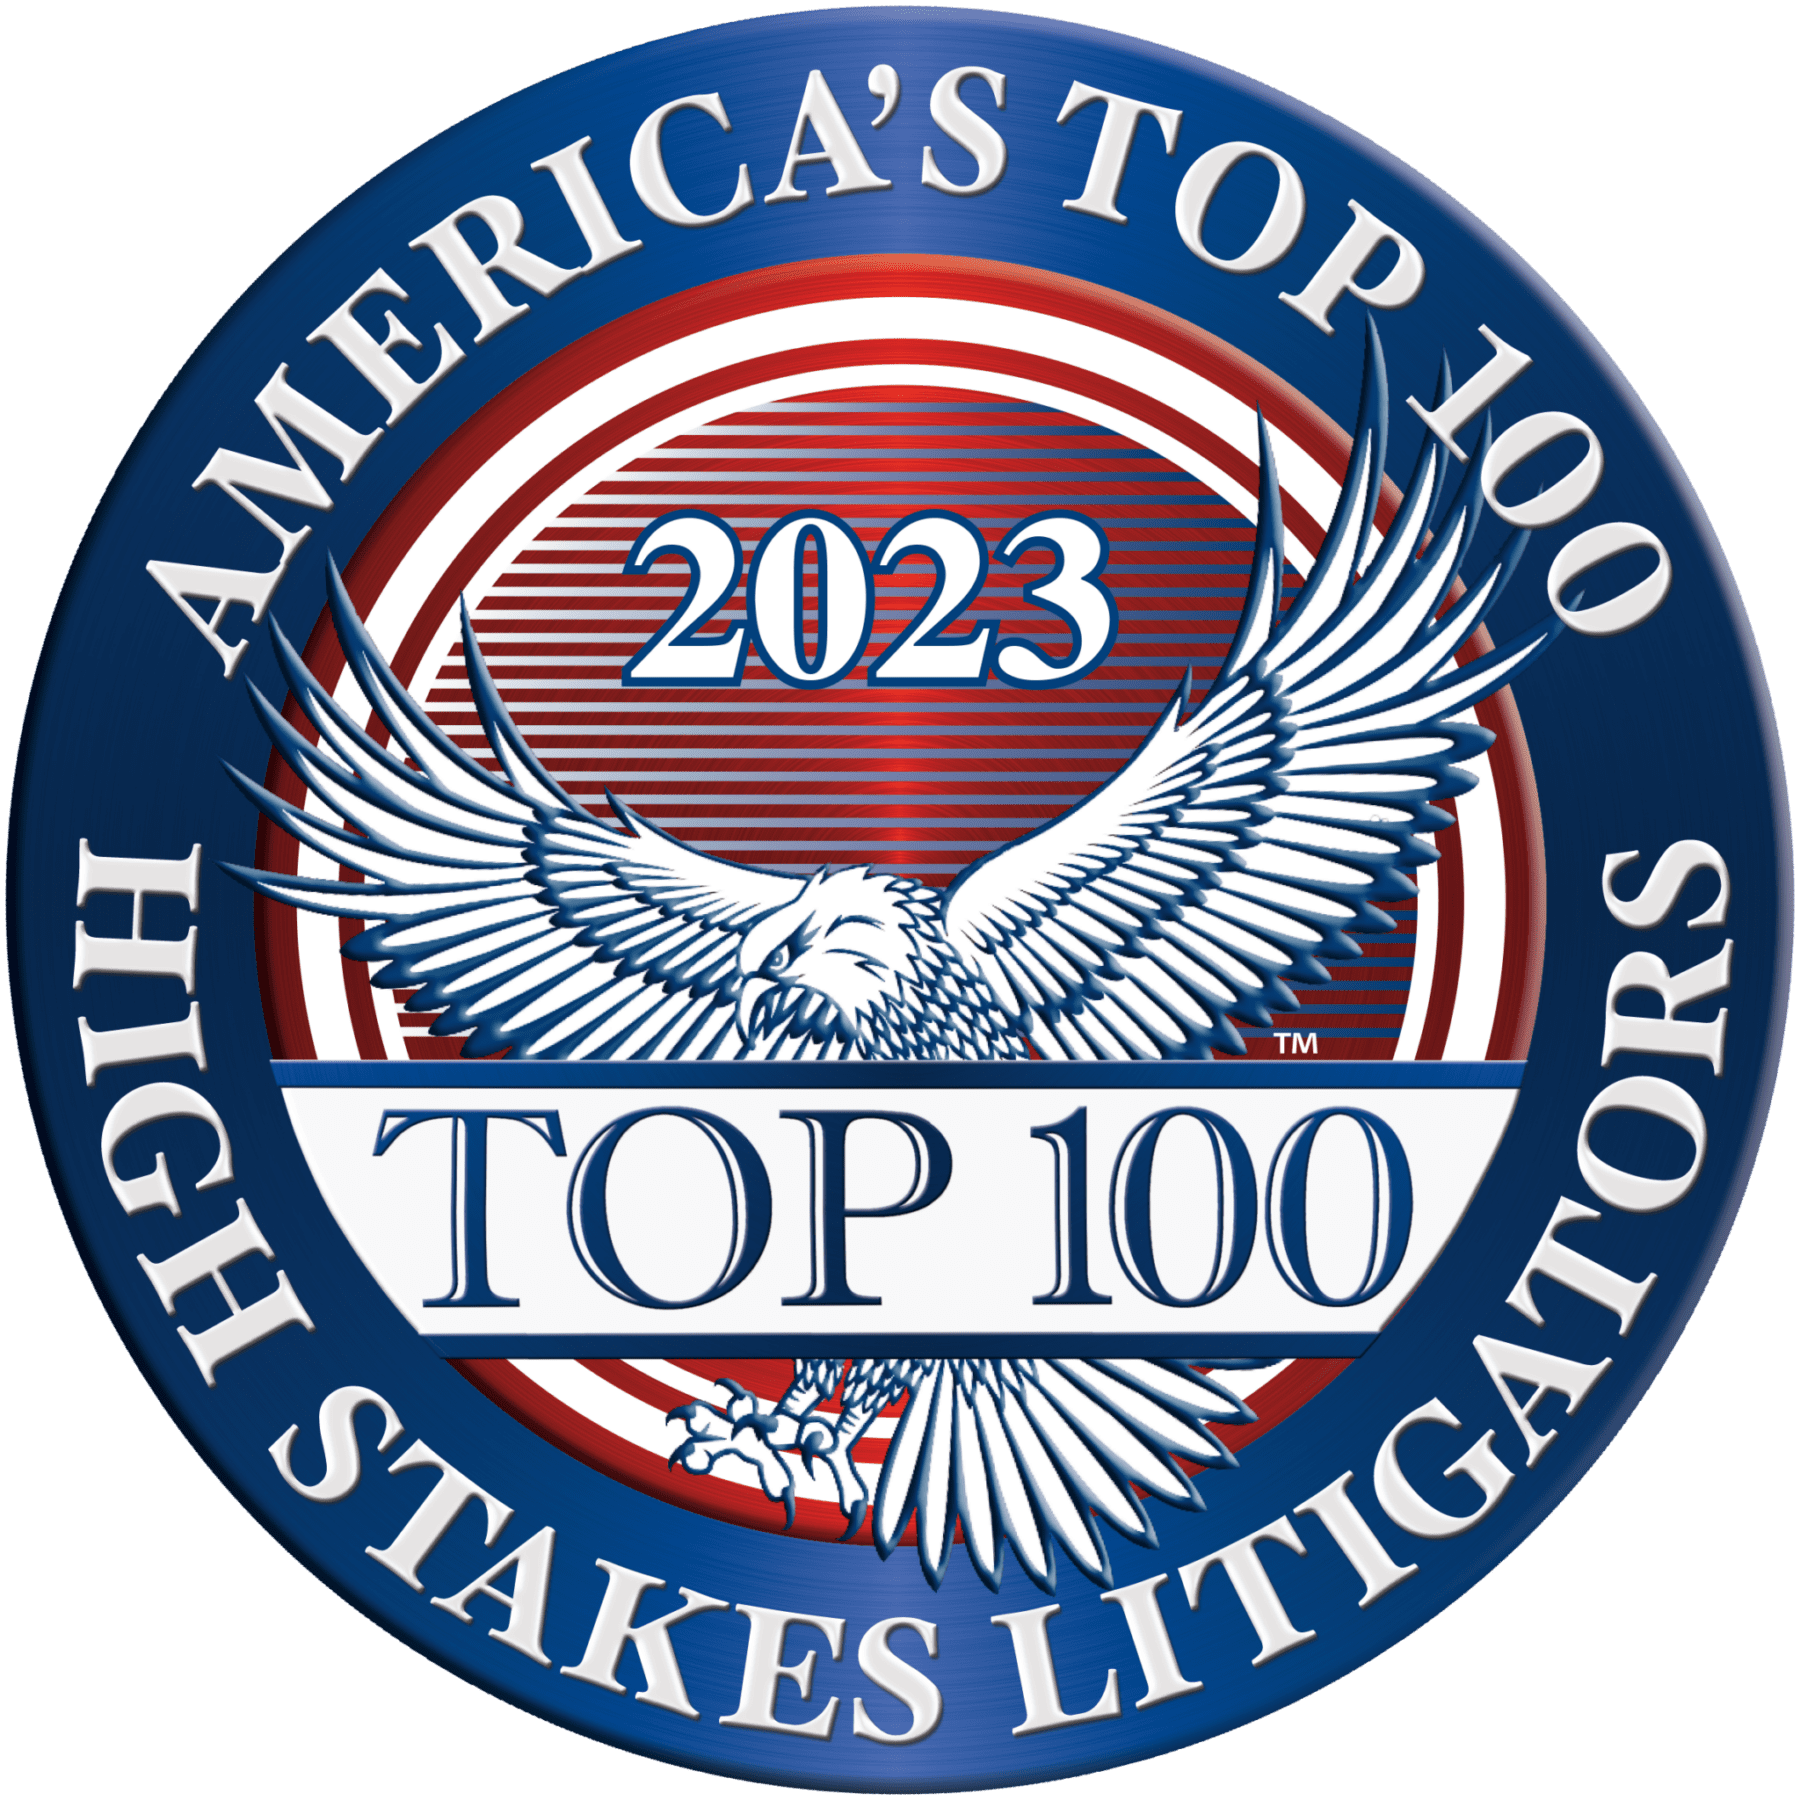 America's Top 100 2023 High Stakes Litigations